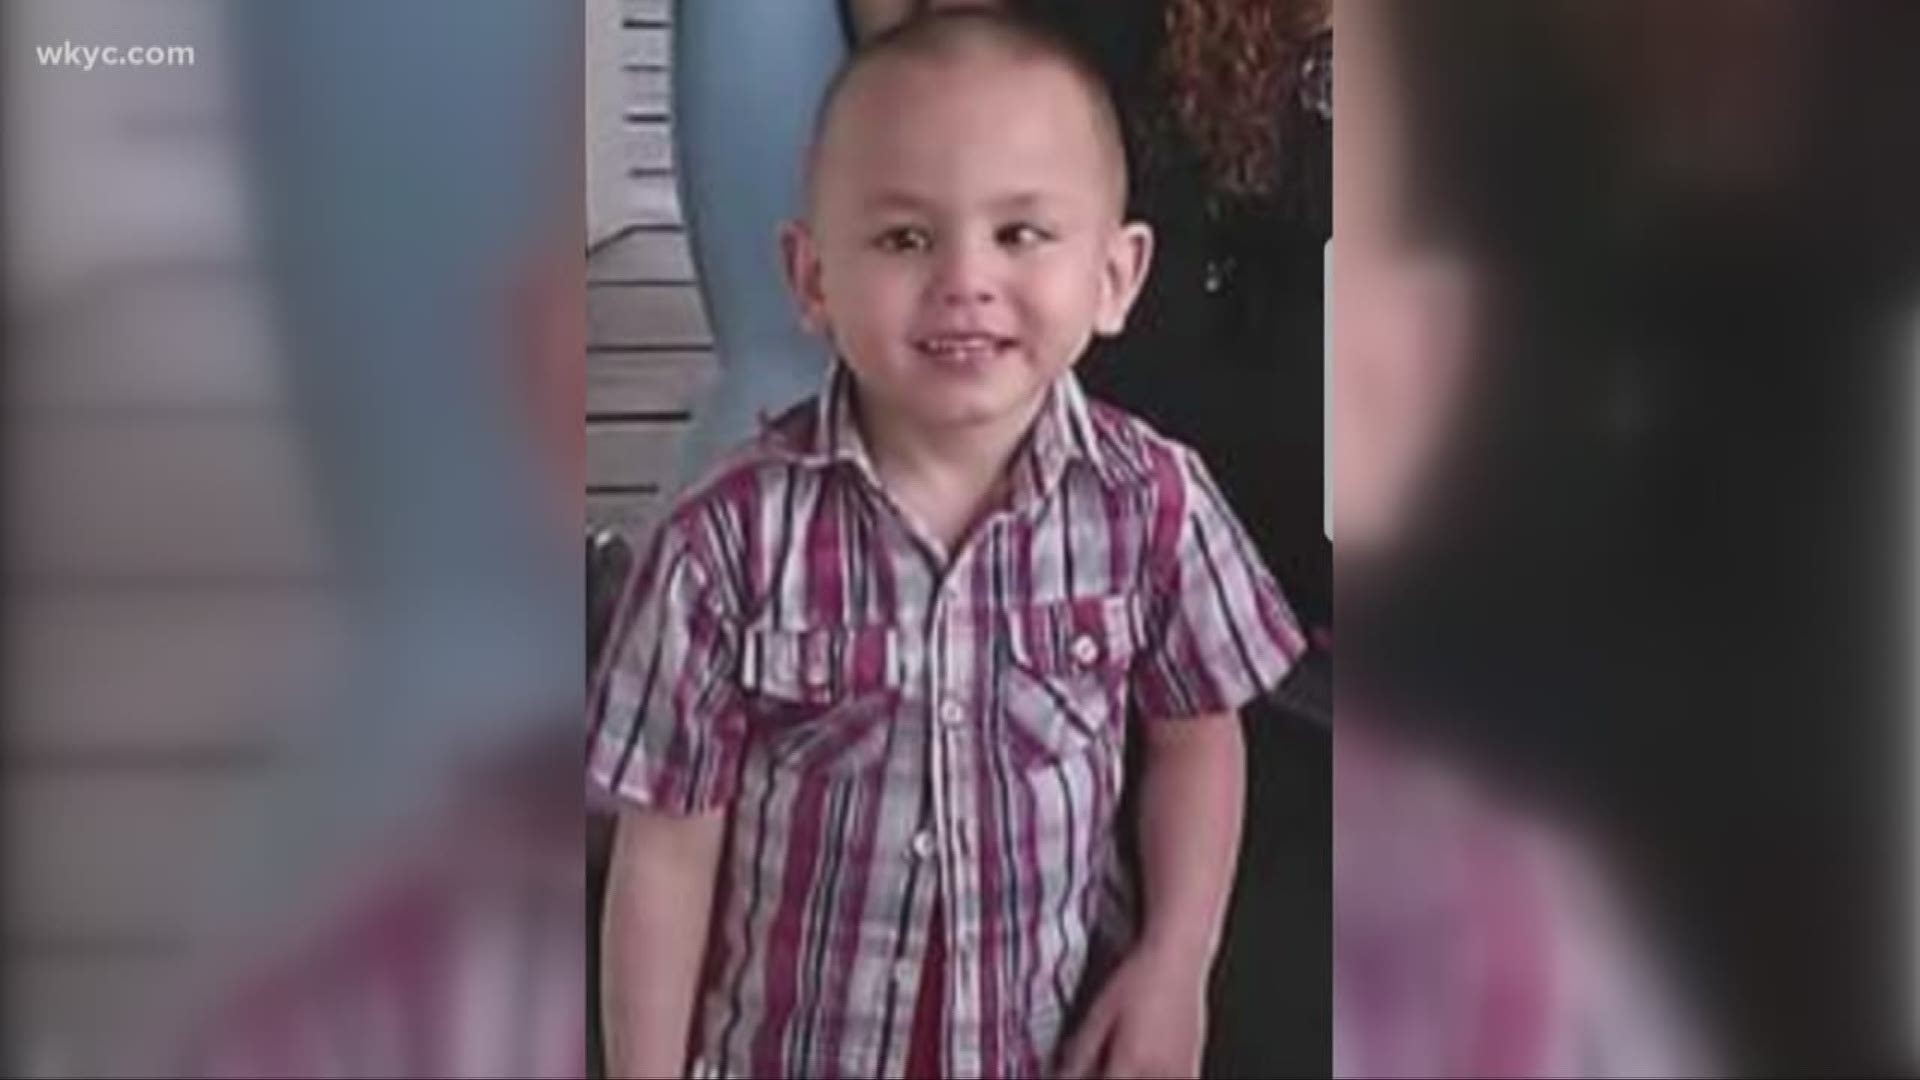 Lawsuit accuses Catholic Charities of not doing enough to save 5-year-old boy